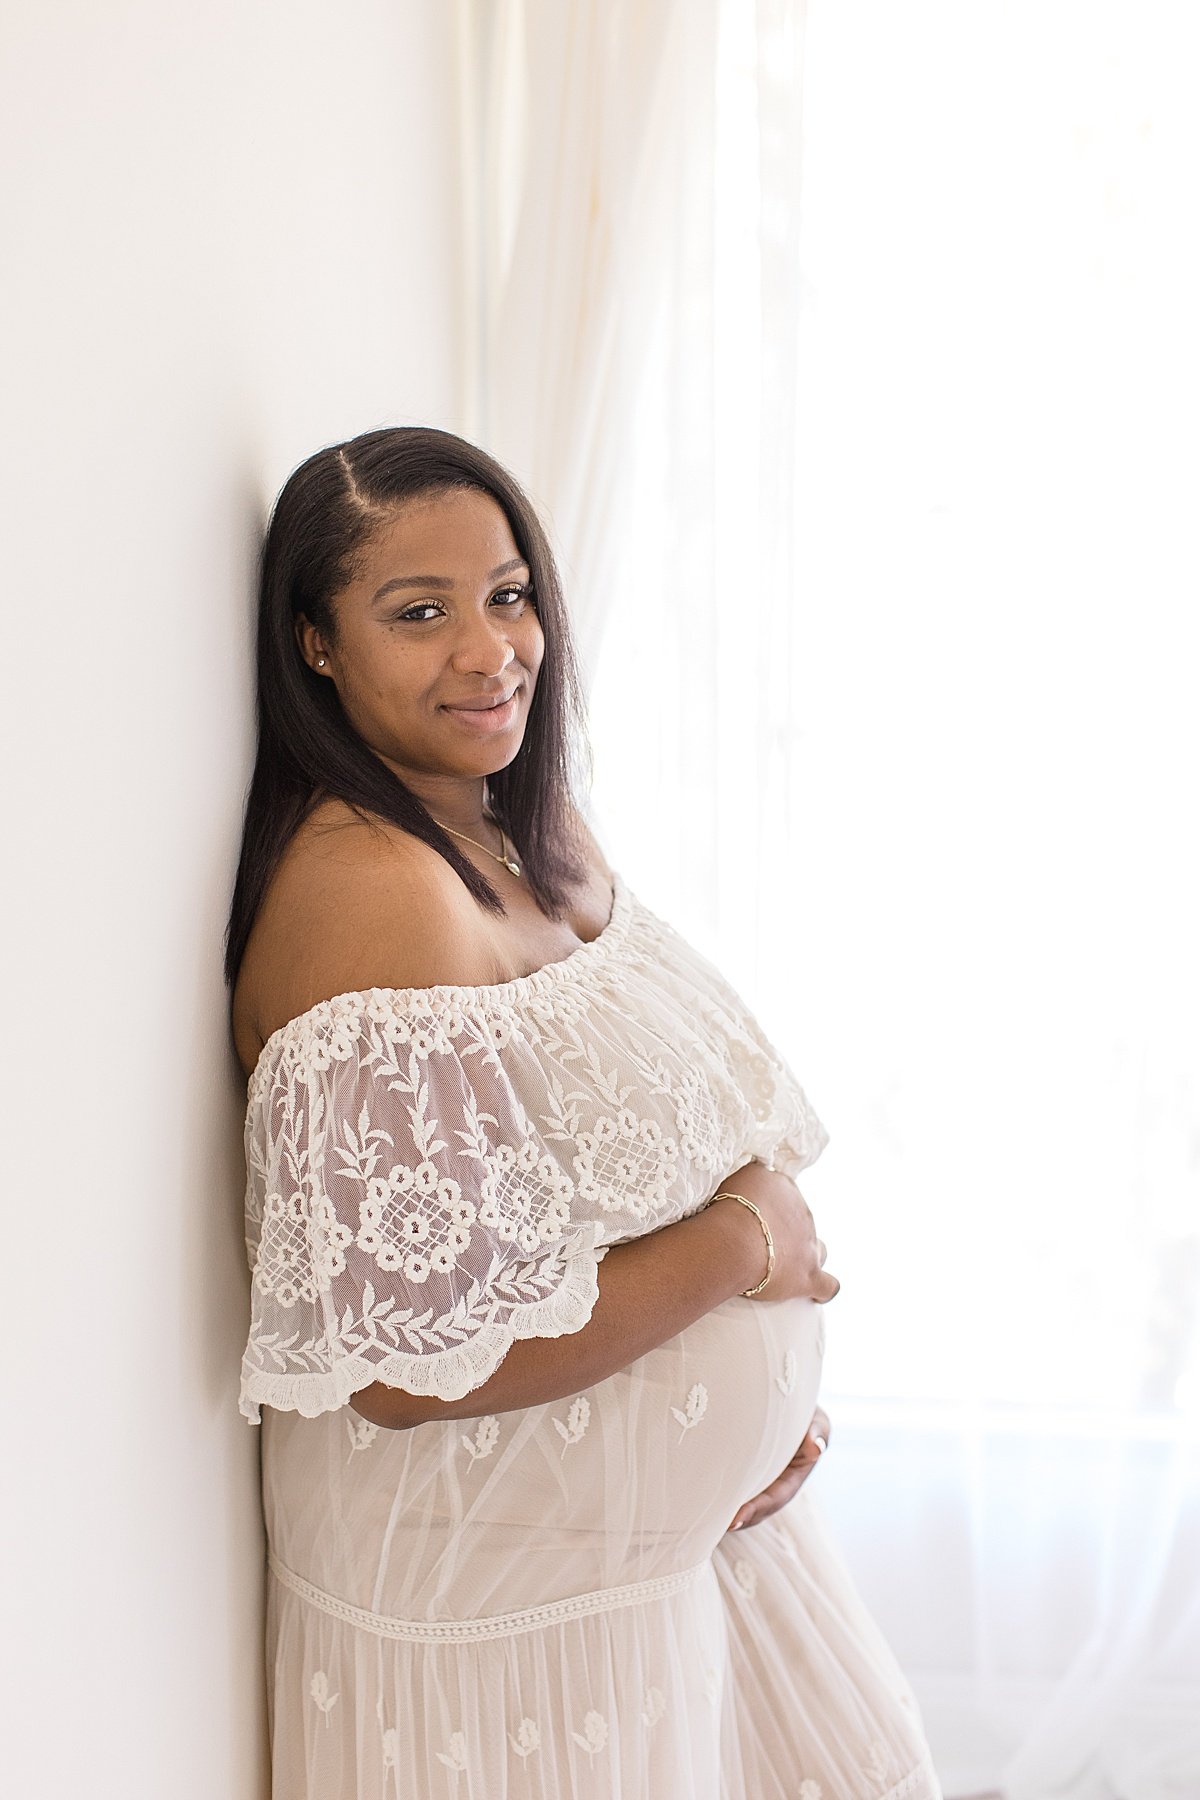 Pregnant Mom during maternity session in Newport Beach with Photographer Ambre Williams